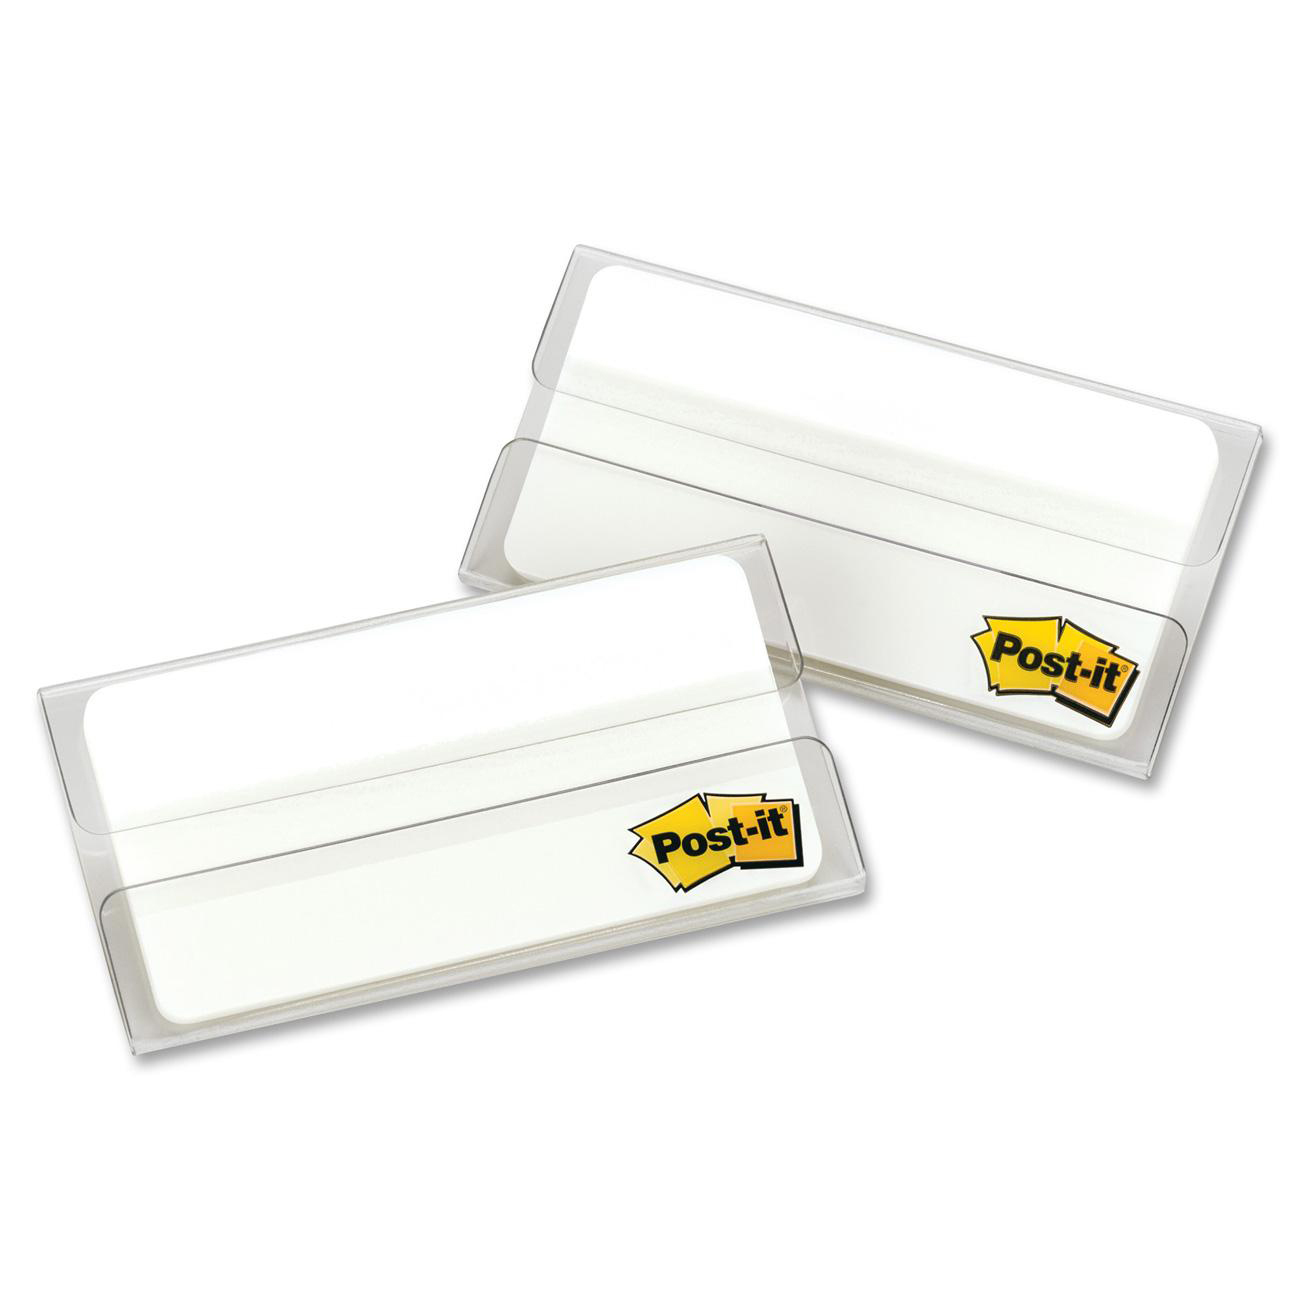 Post-it Angled Filing Tabs, Assorted Bright, 2 x 1.5 - 24 tabs